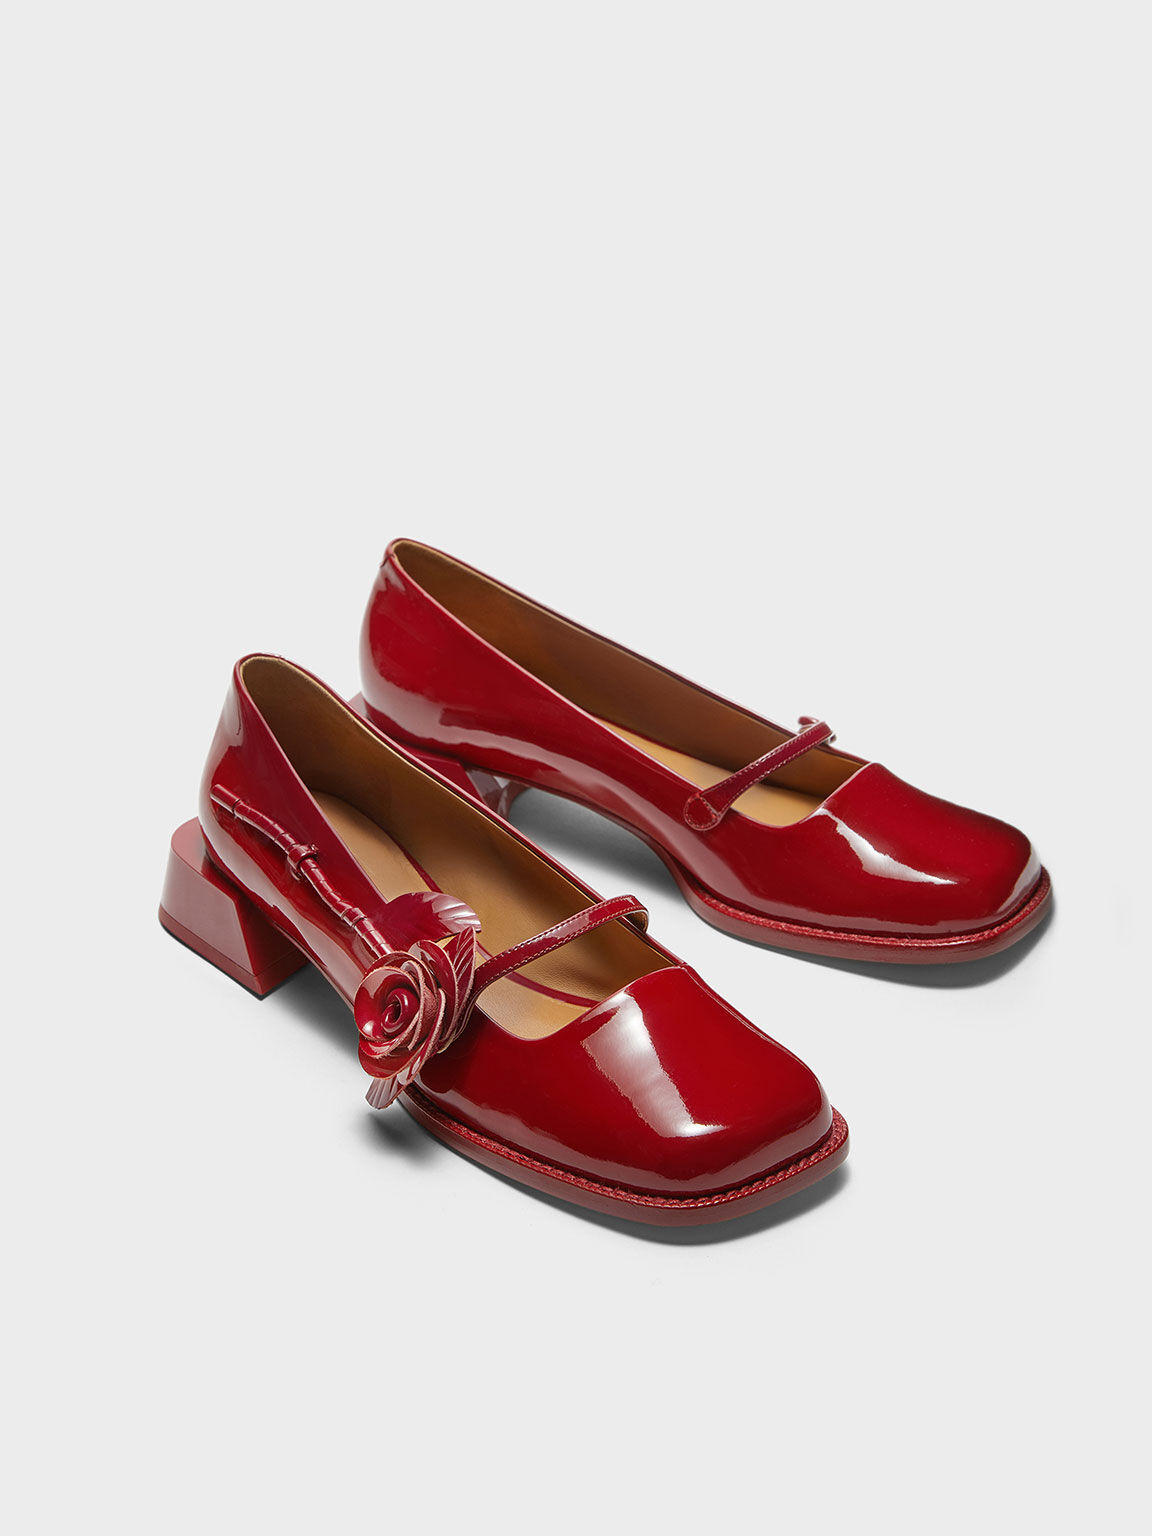 Chloris Patent Leather Rose-Embellished Mary Jane Pumps, Red, hi-res